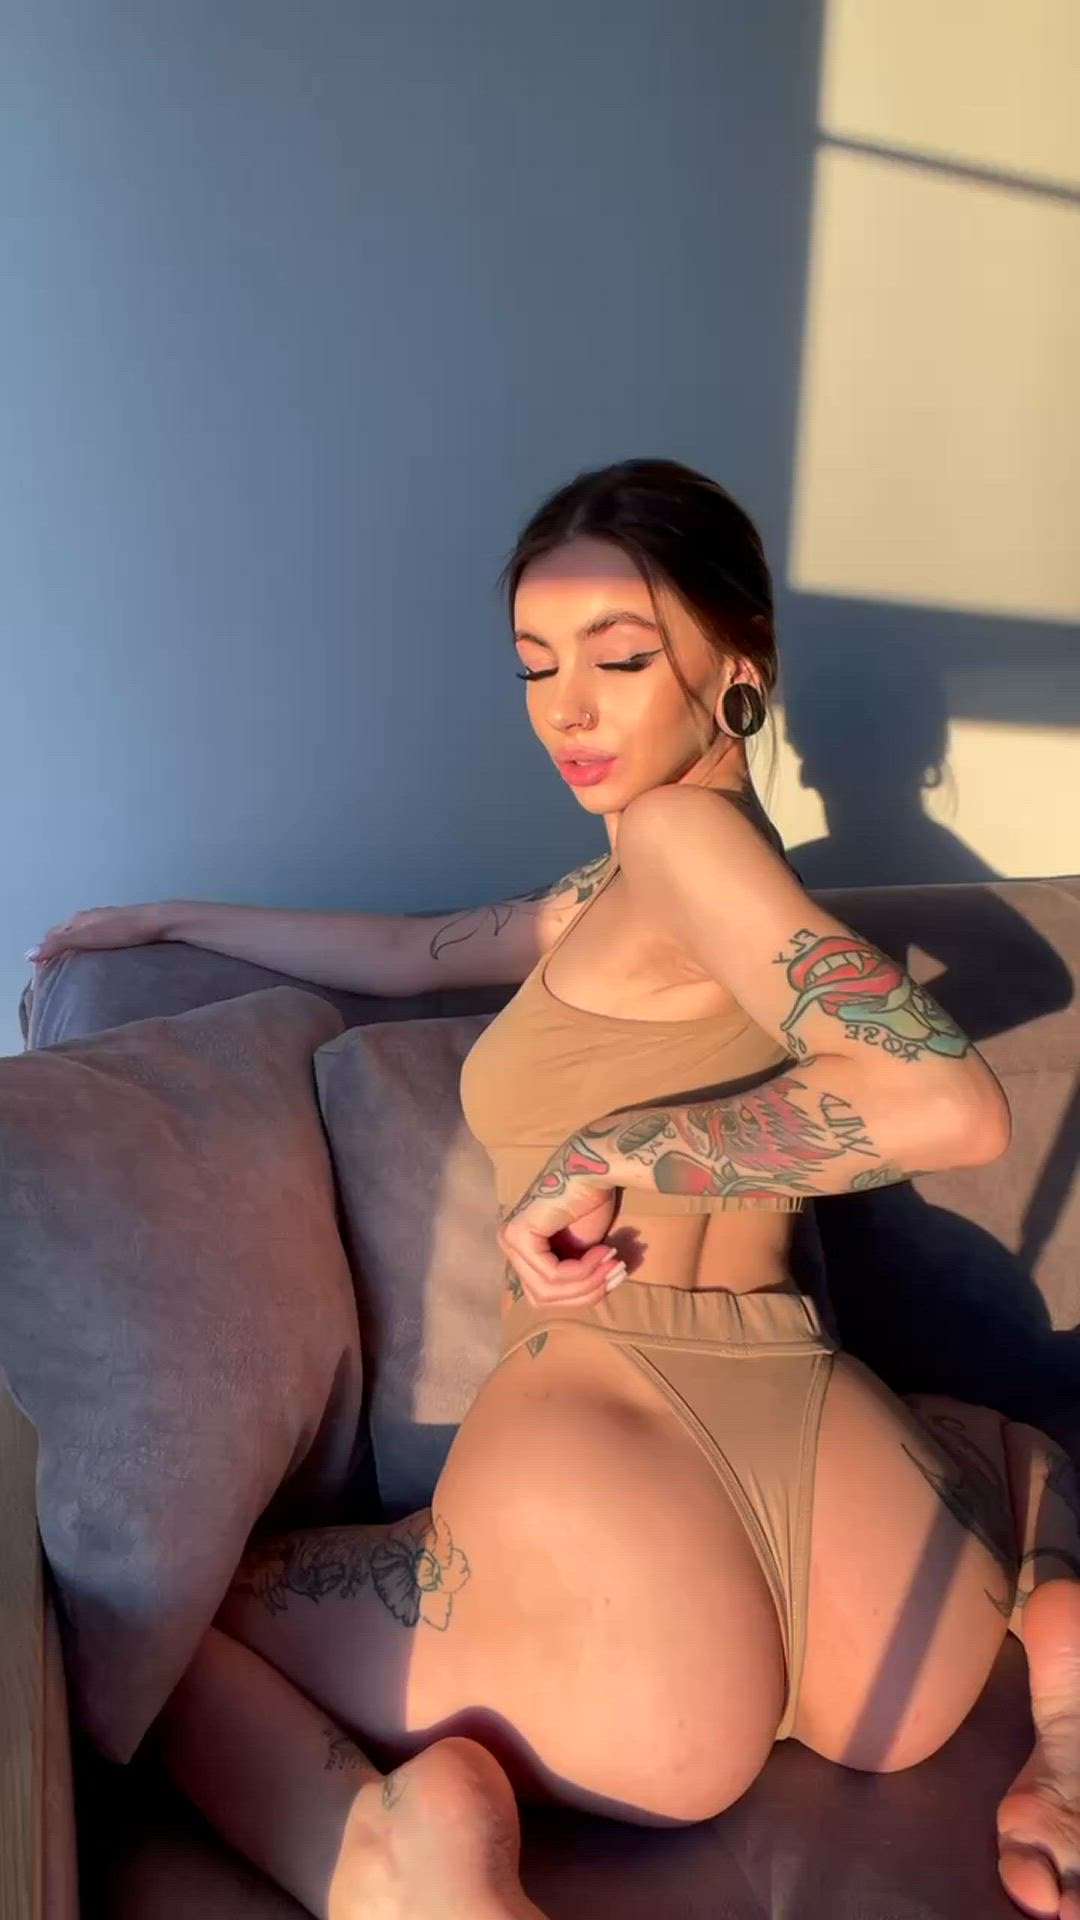 Ass porn video with onlyfans model mallorygrace <strong>@action</strong>